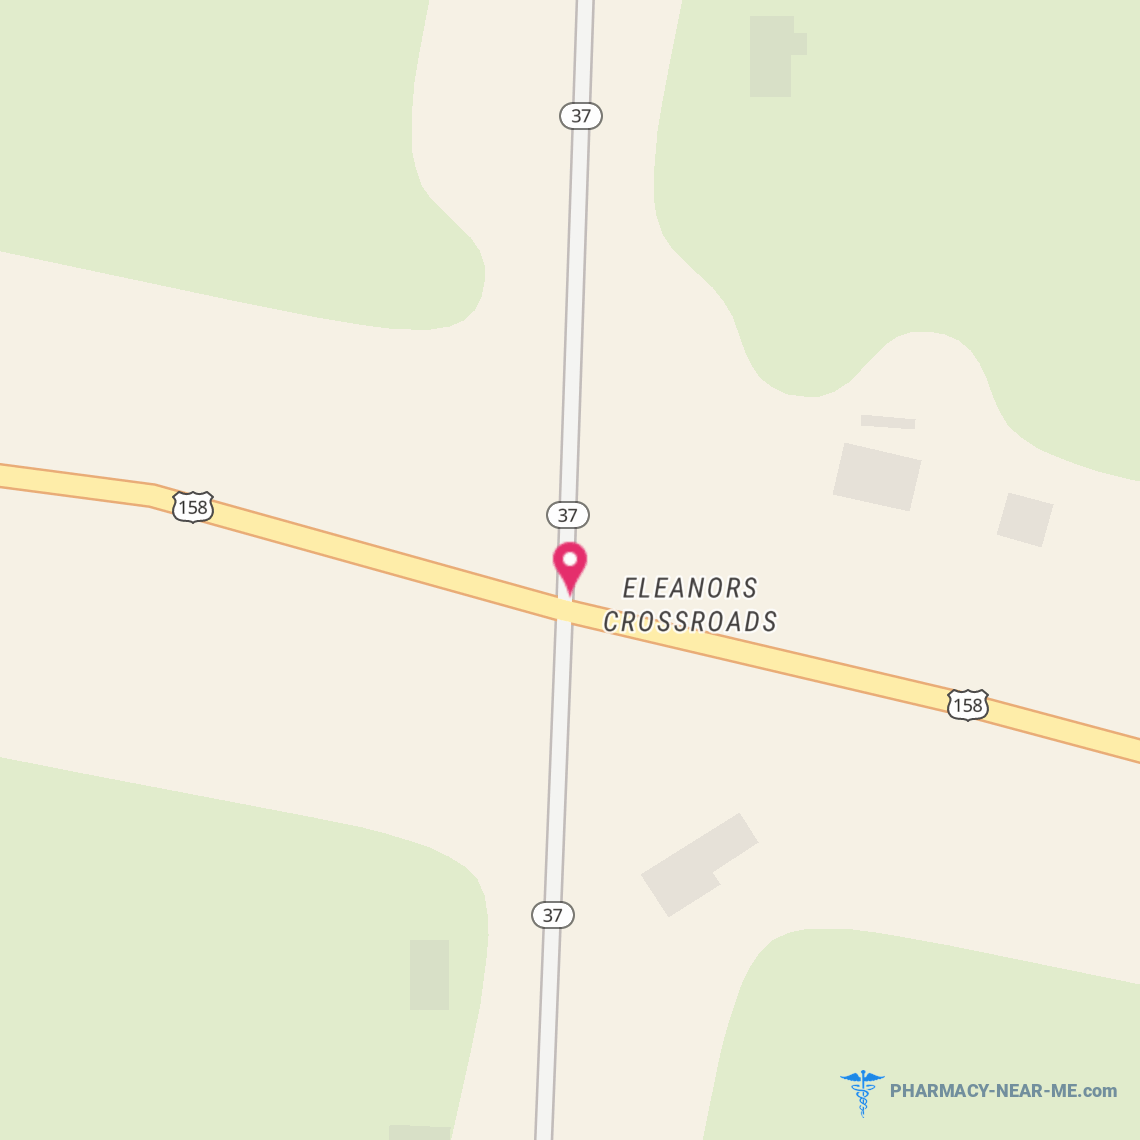 GATES COUNTY PHARMACY - Pharmacy Hours, Phone, Reviews & Information: 701 US Highway 158 W, Eleanors Crossroads, North Carolina 27937, United States